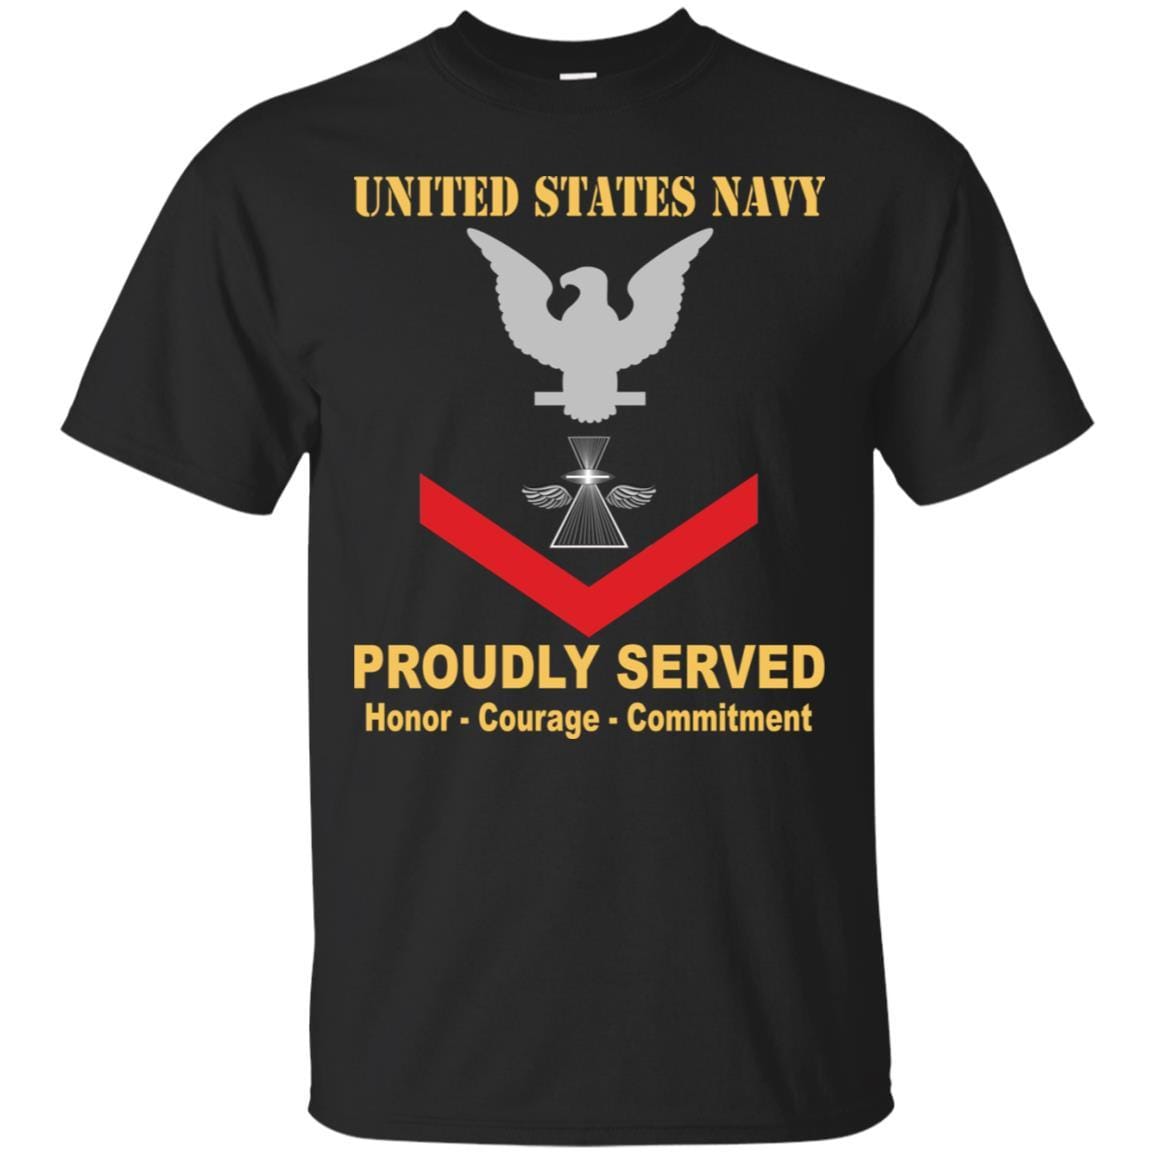 US Navy Photographer's Mate Navy PH E-4 Rating Badges Proudly Served T-Shirt For Men On Front-TShirt-Navy-Veterans Nation